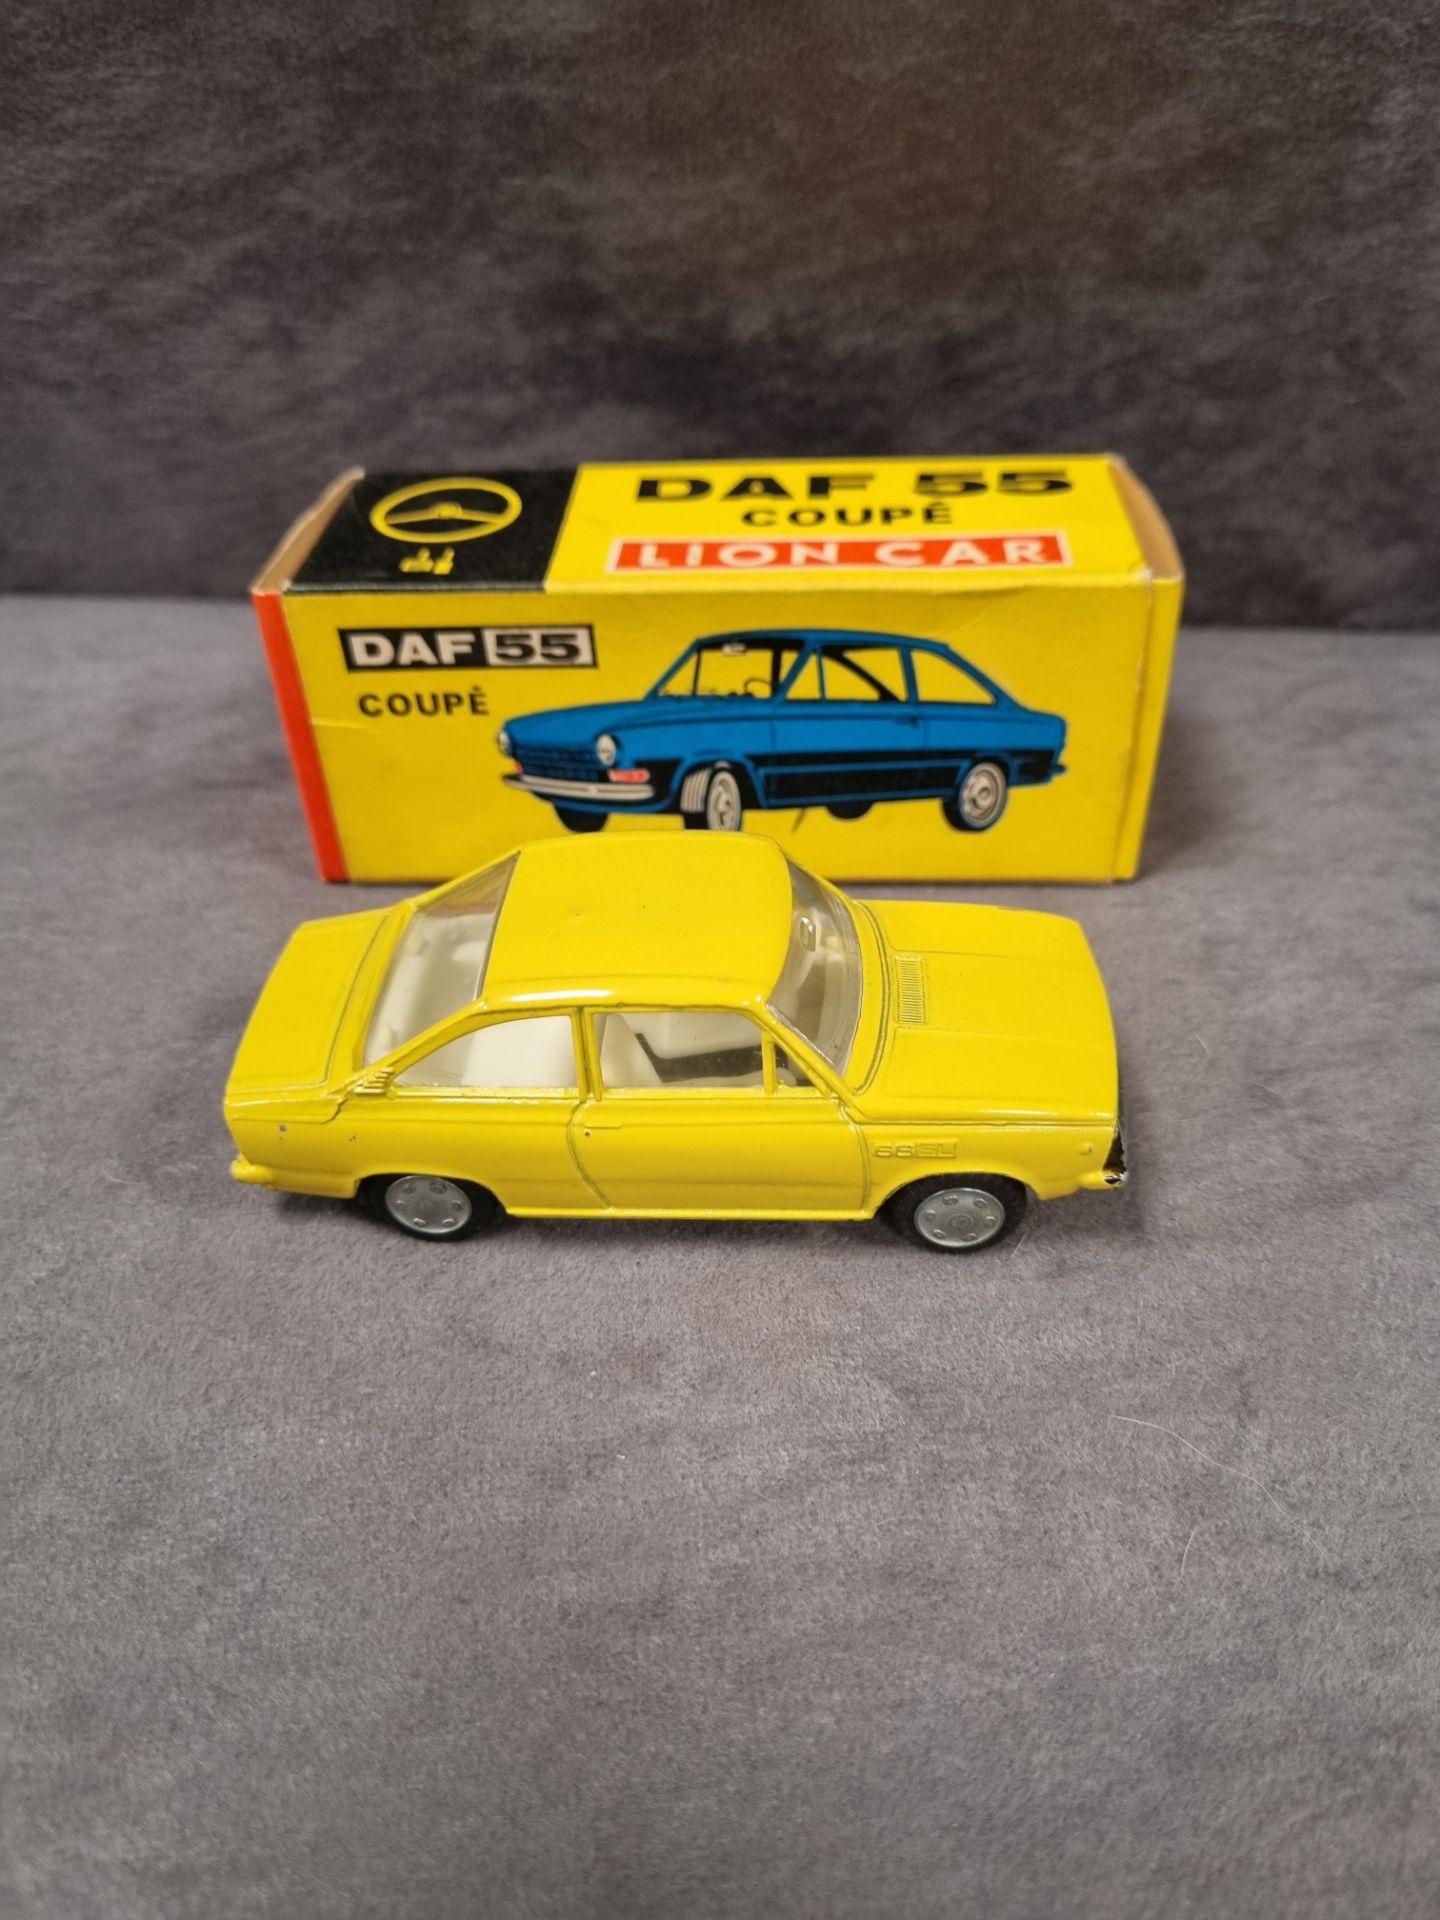 Lion Car diecast #40 DAF55 Coupe in yellow with excellent box - Bild 3 aus 4